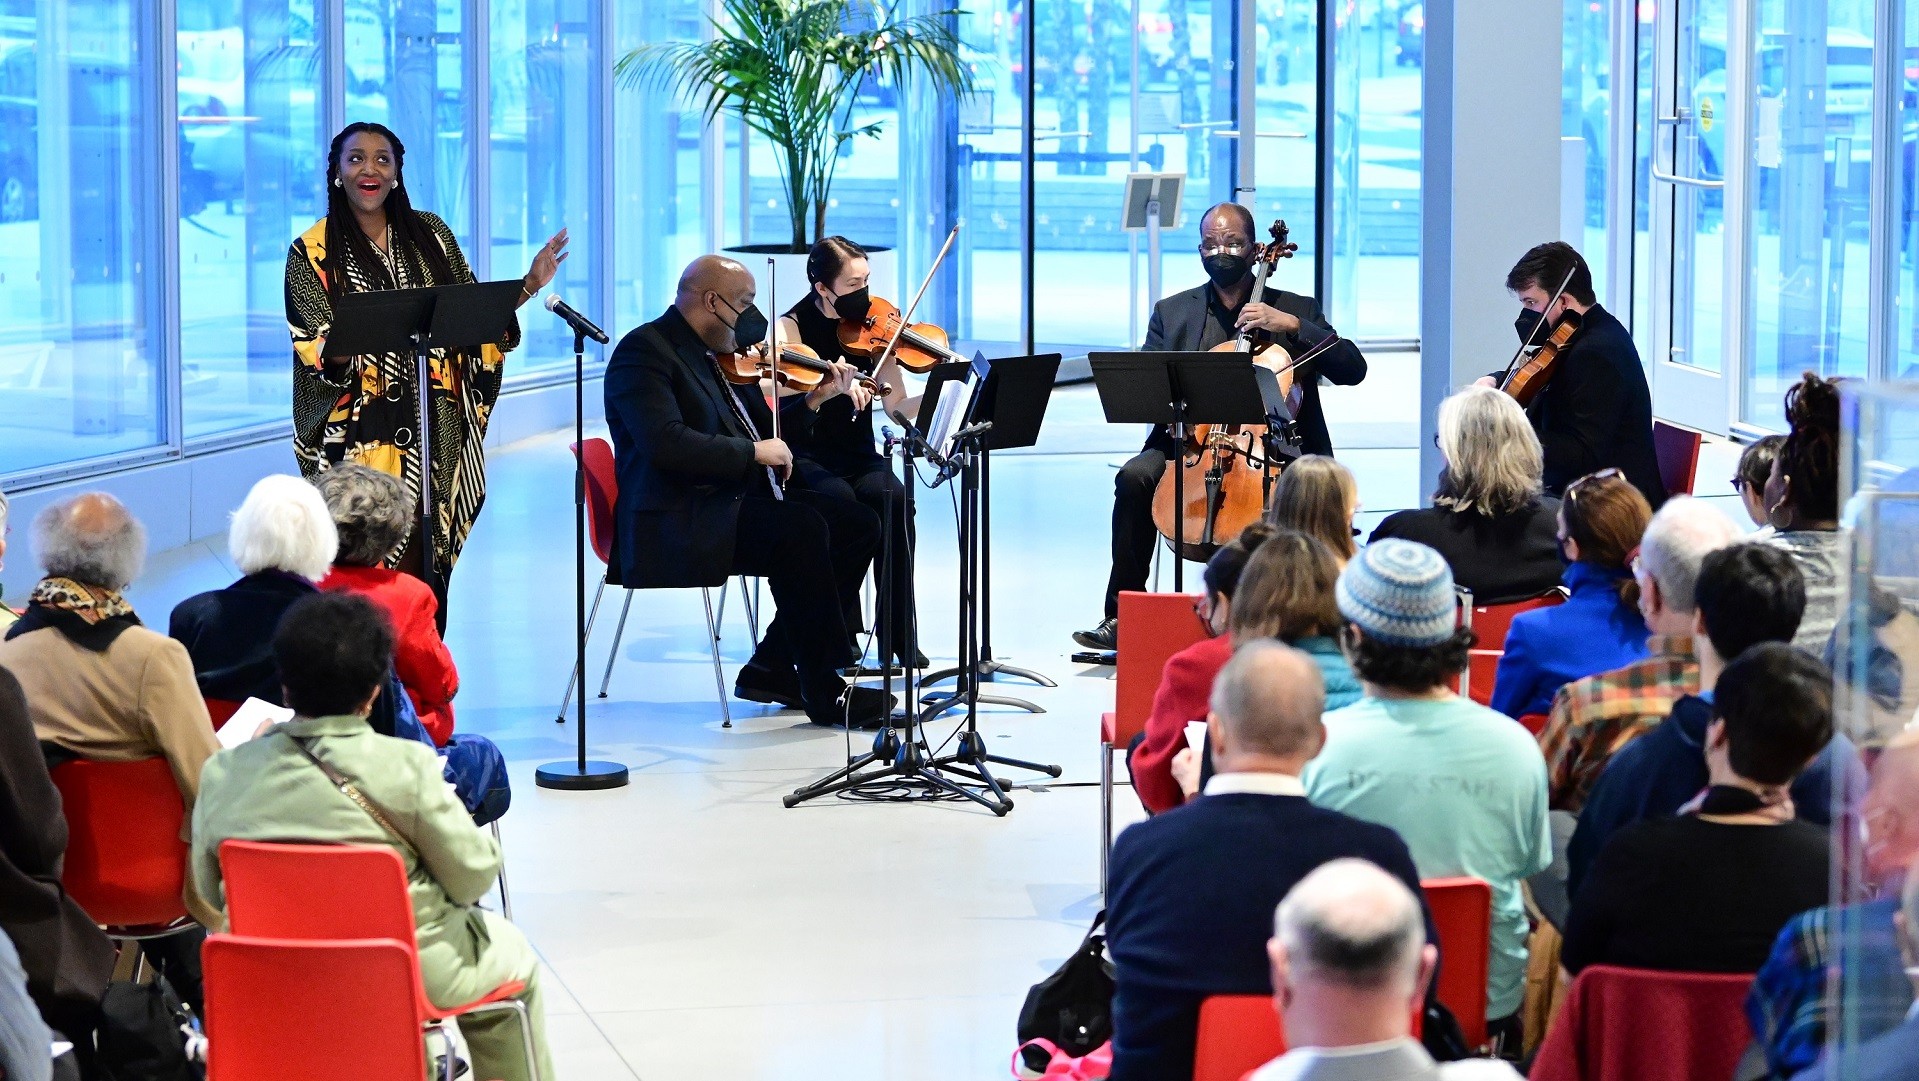 Jazz quintet performs in Atrium to an audience